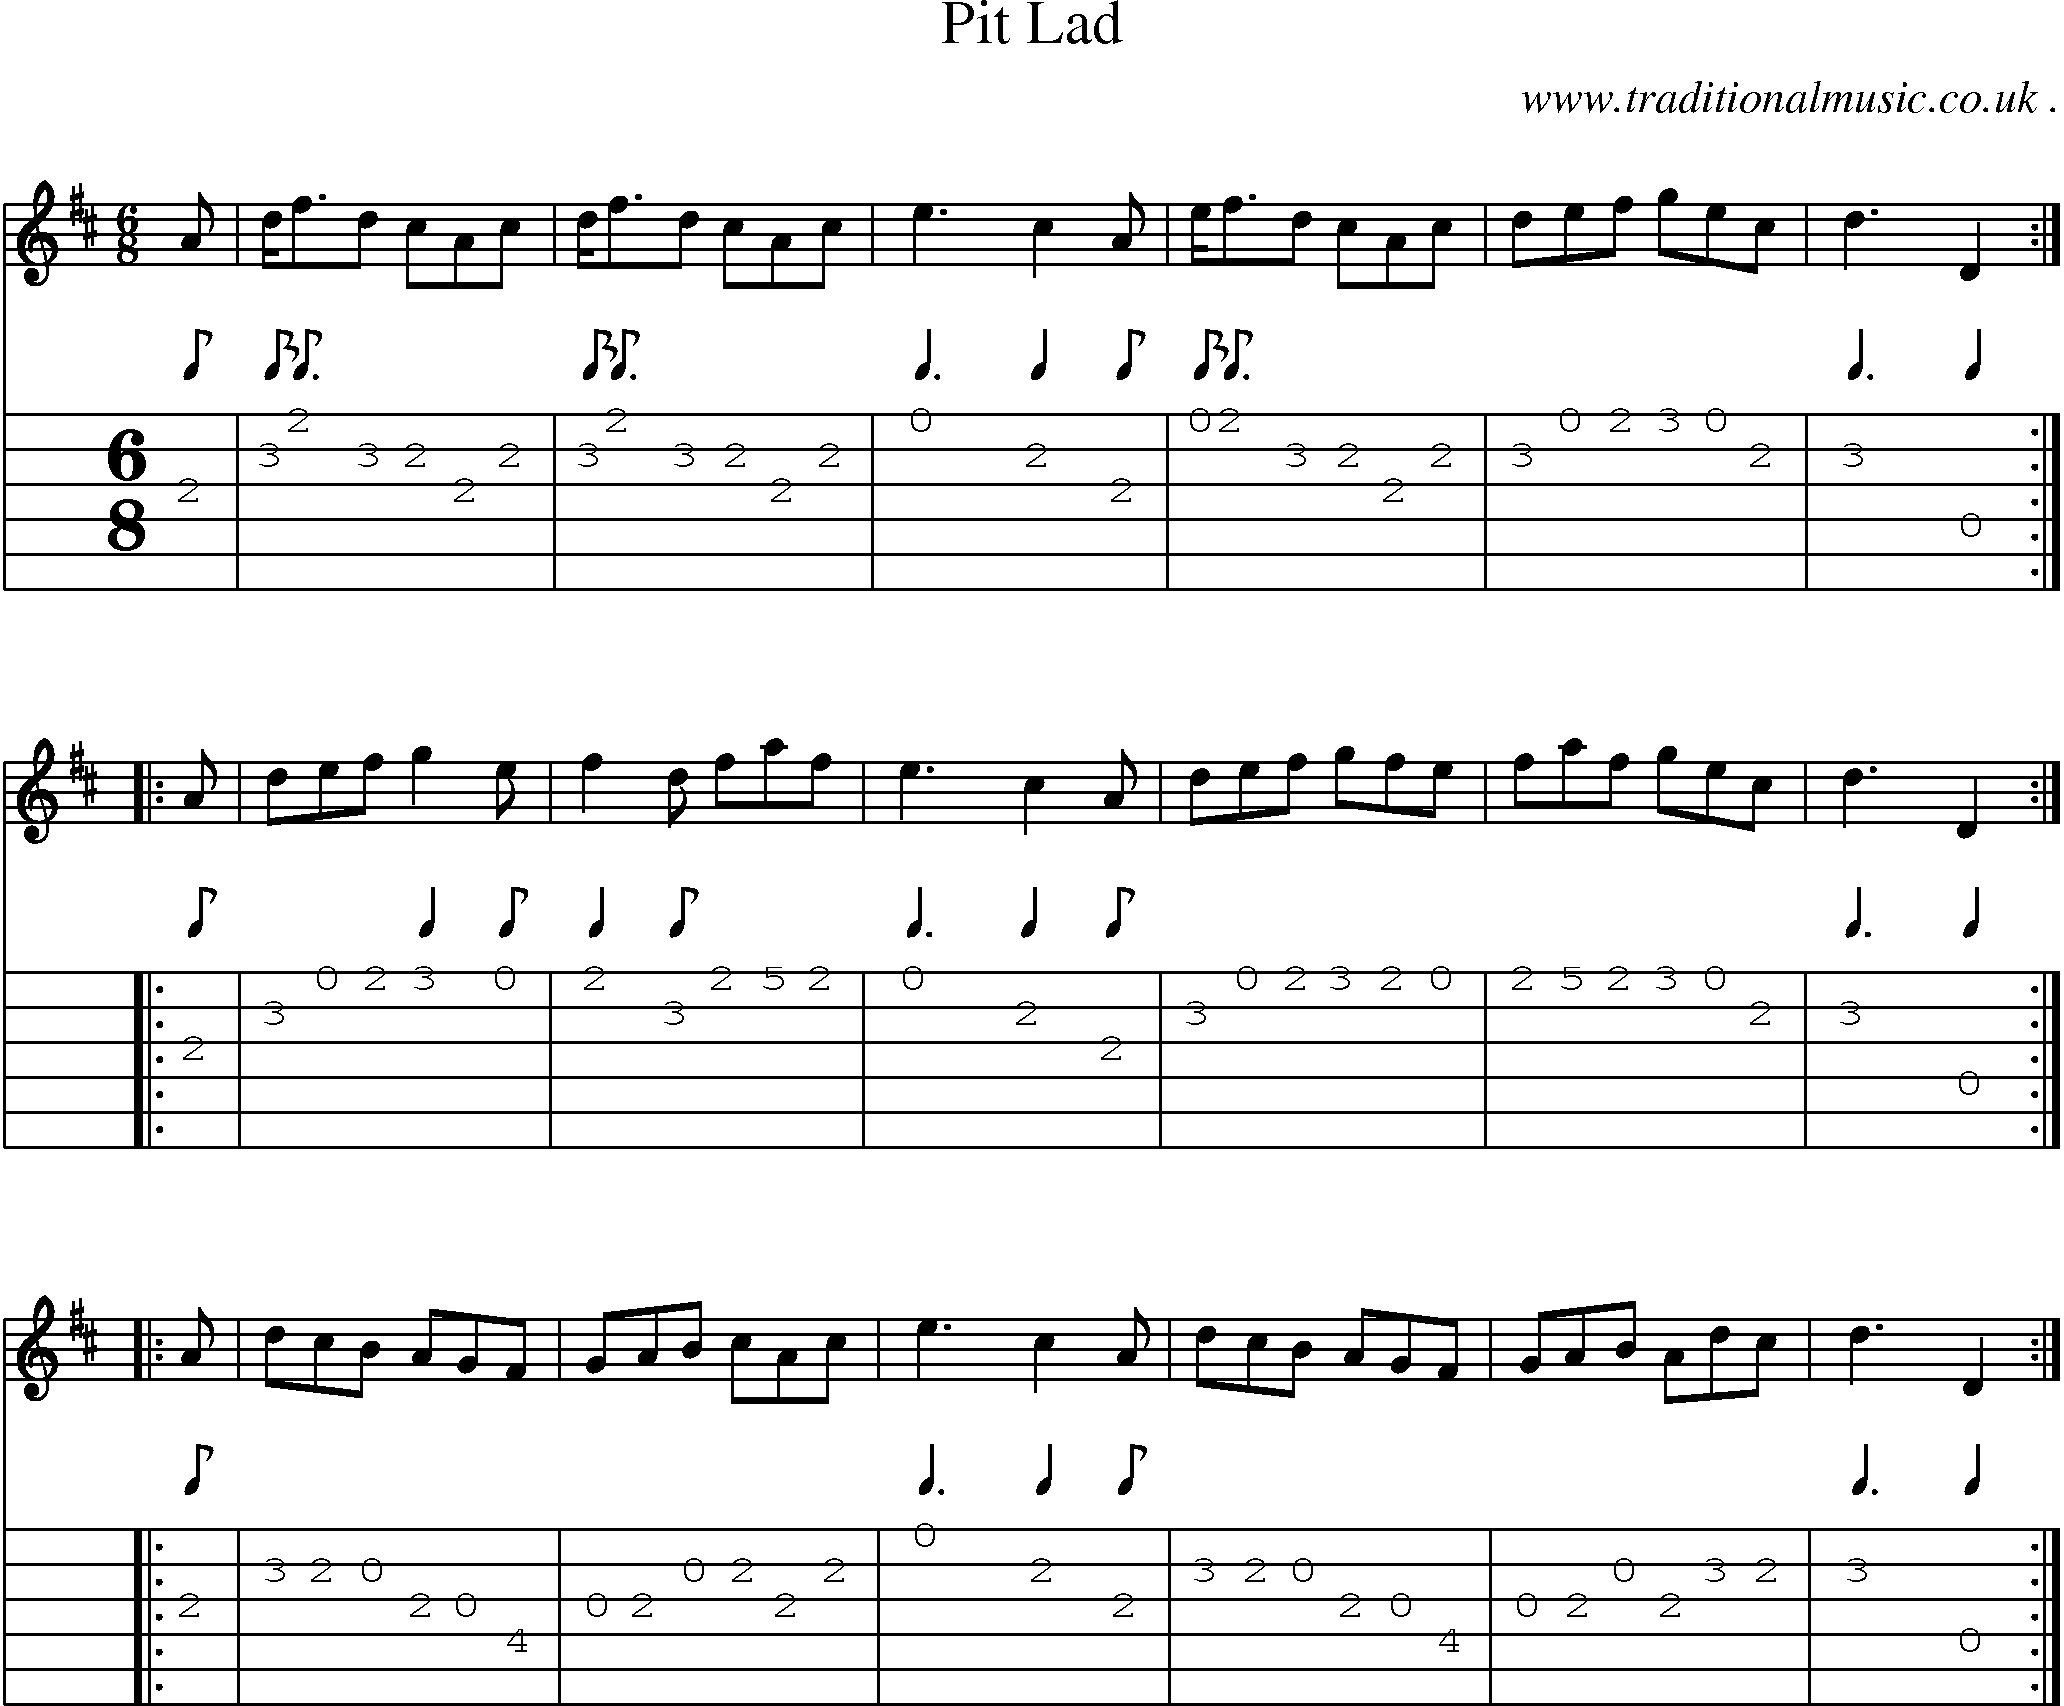 Sheet-Music and Guitar Tabs for Pit Lad